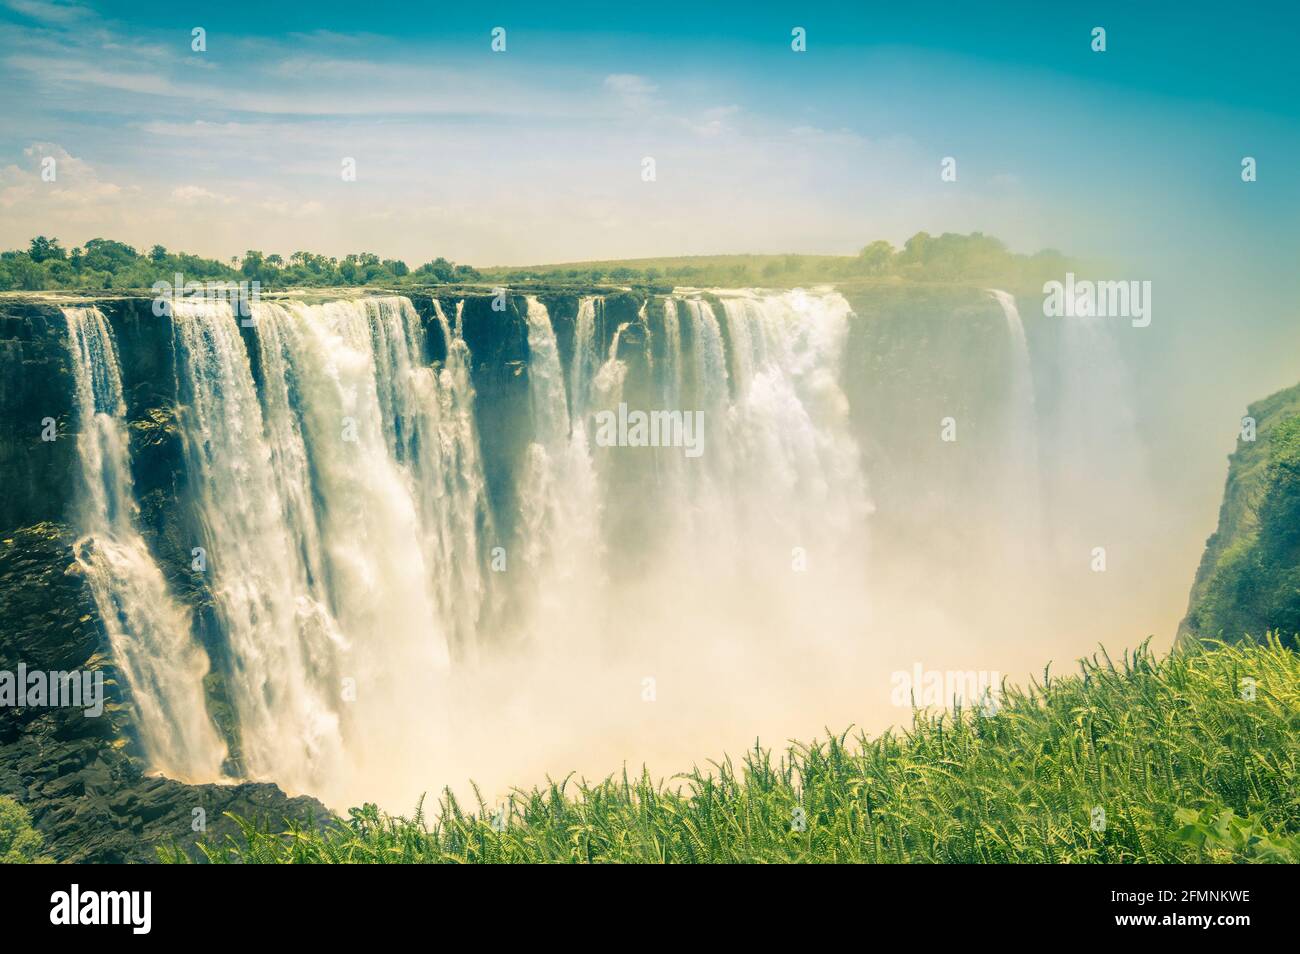 Vintage postcard of Victoria Waterfalls - Natural wonder of Zimbabwe - Continent of Africa Stock Photo